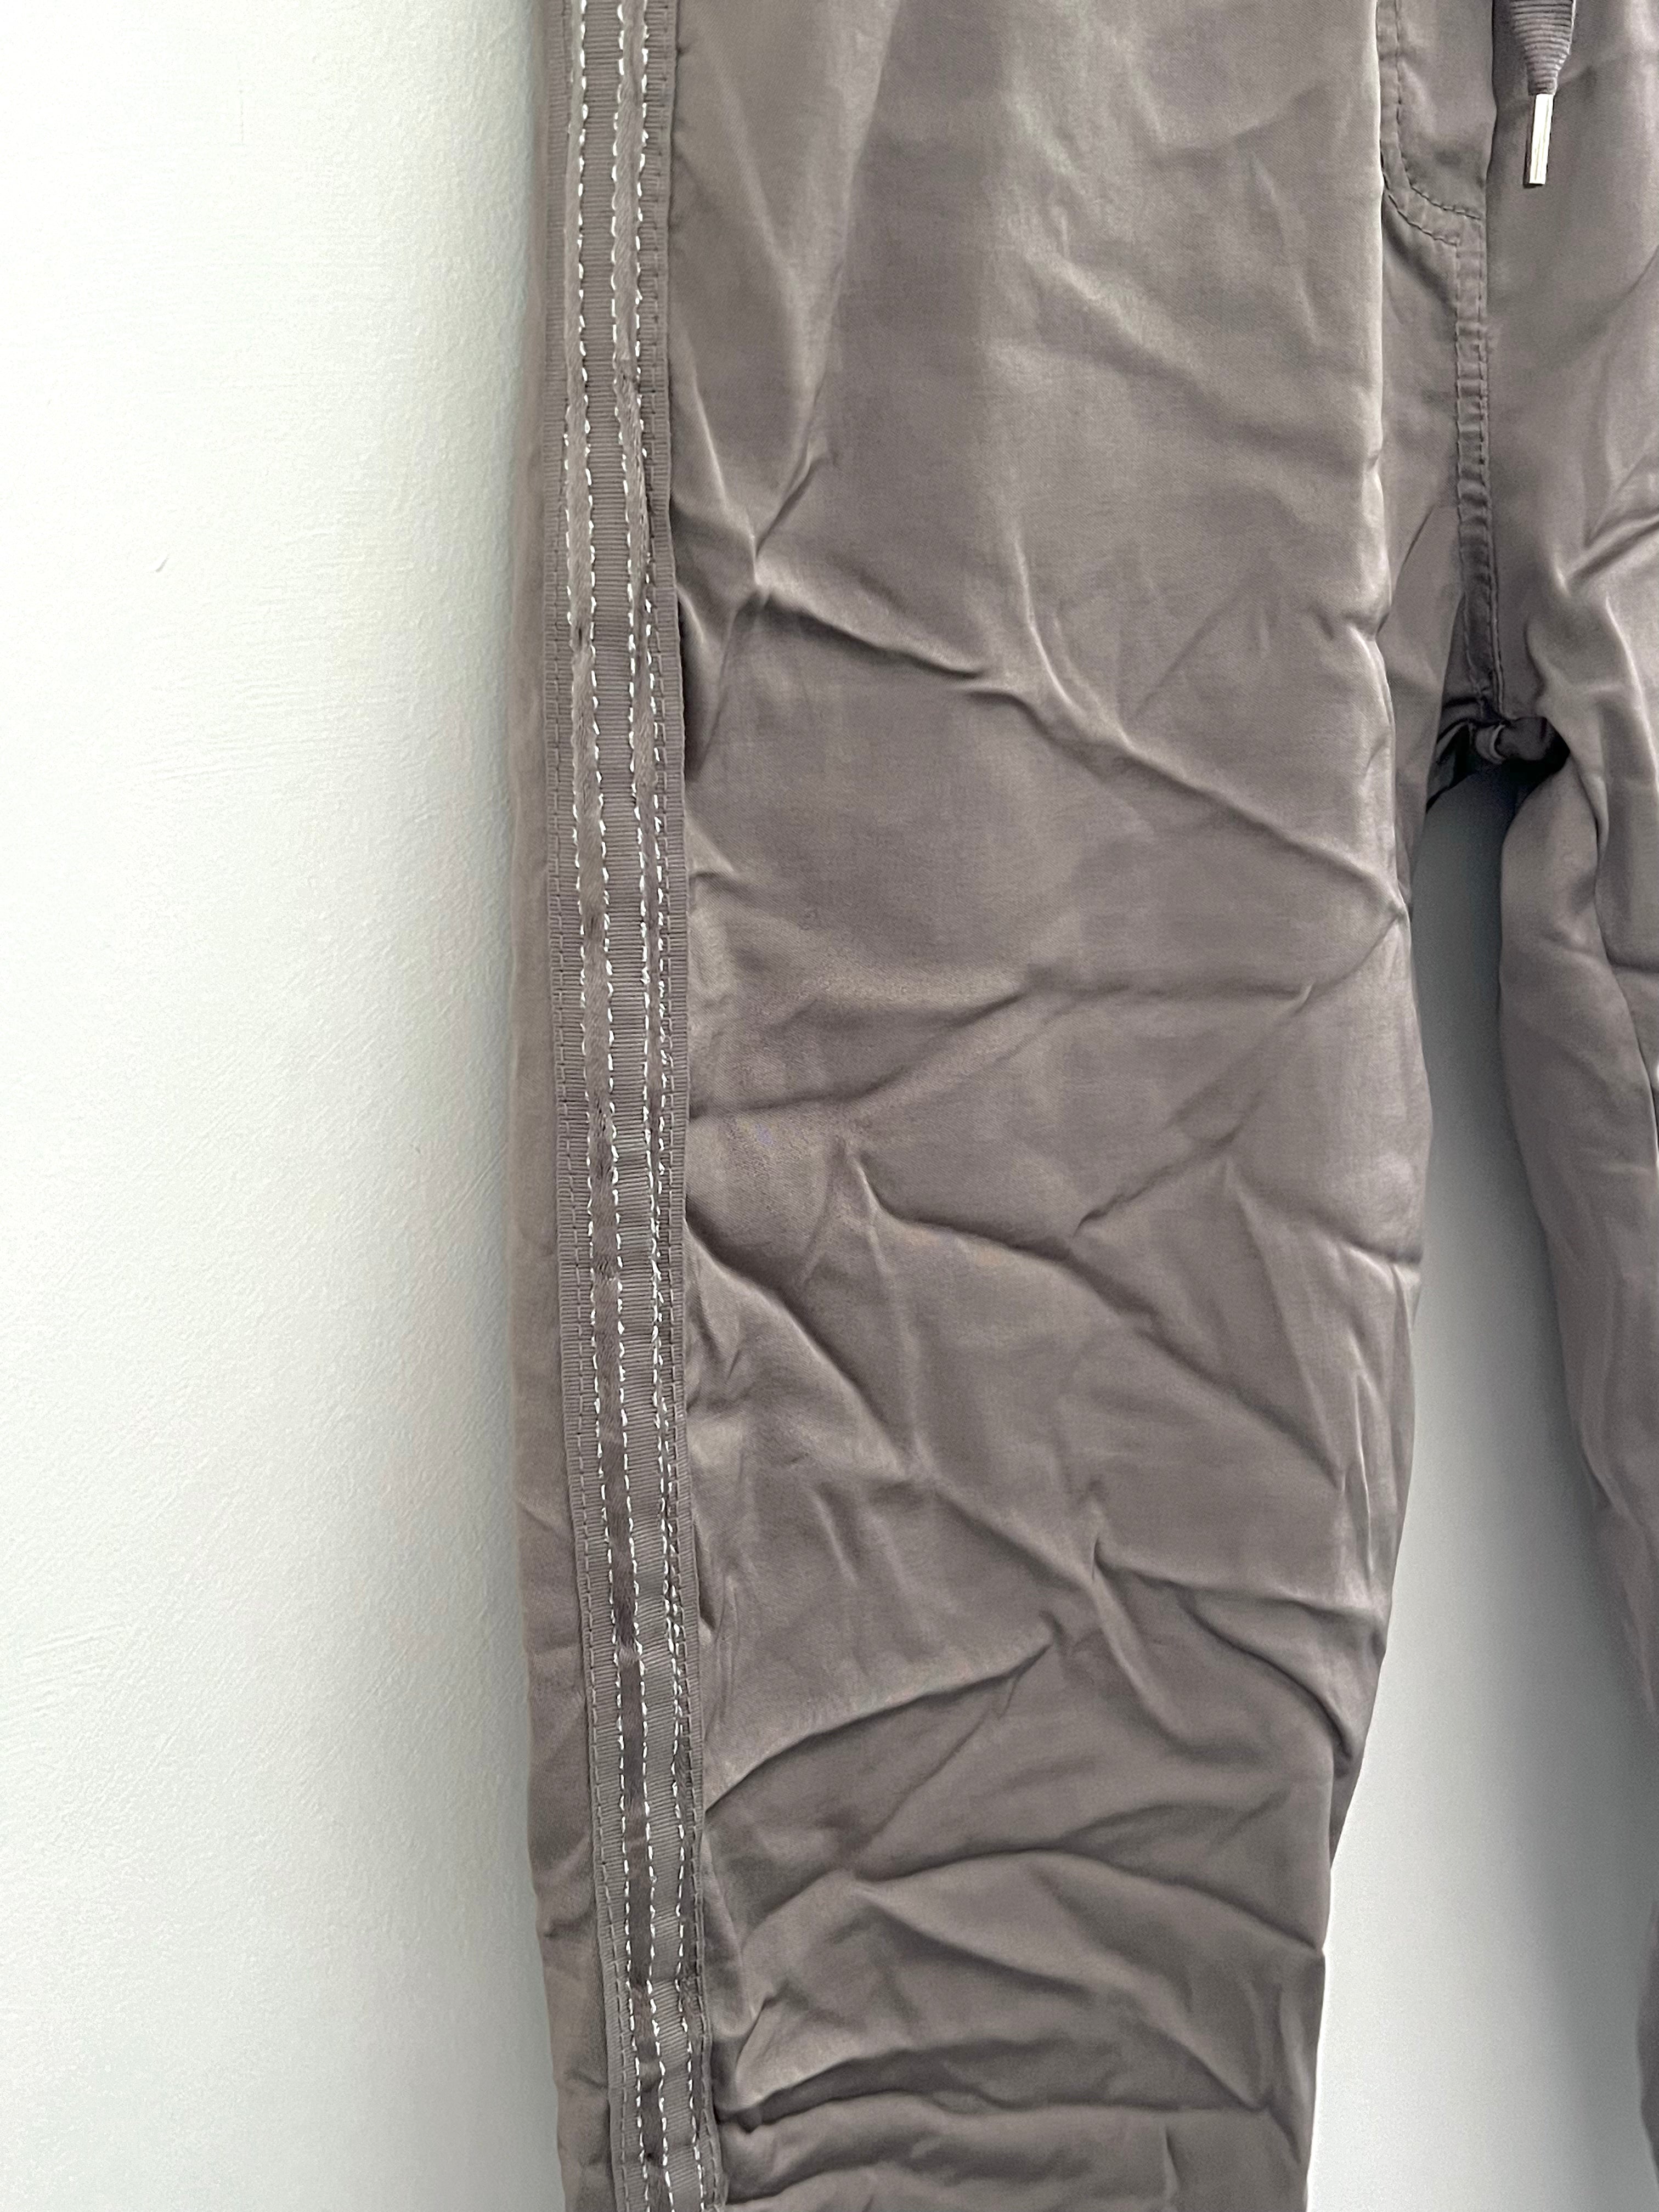 Super Stretch Glossy Joggers in Taupe